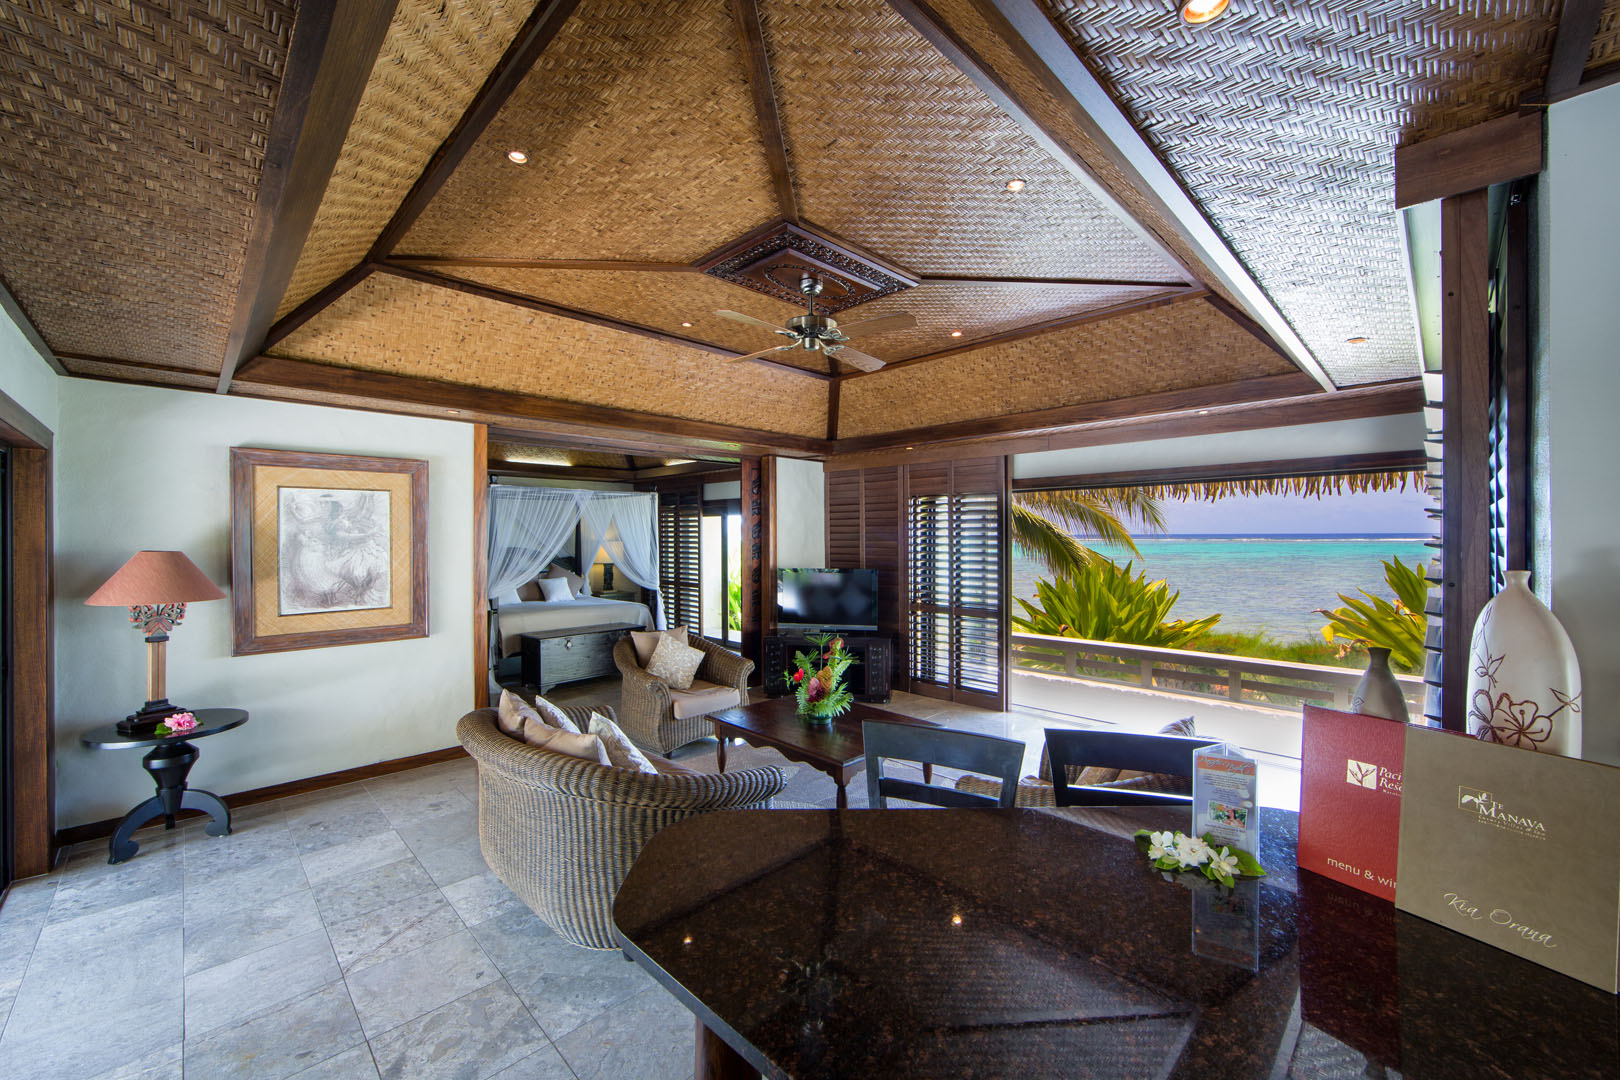 Te Manava luxury villas, view from the inside of the Ultimate beachfront villa looking out onto the blue lagoon